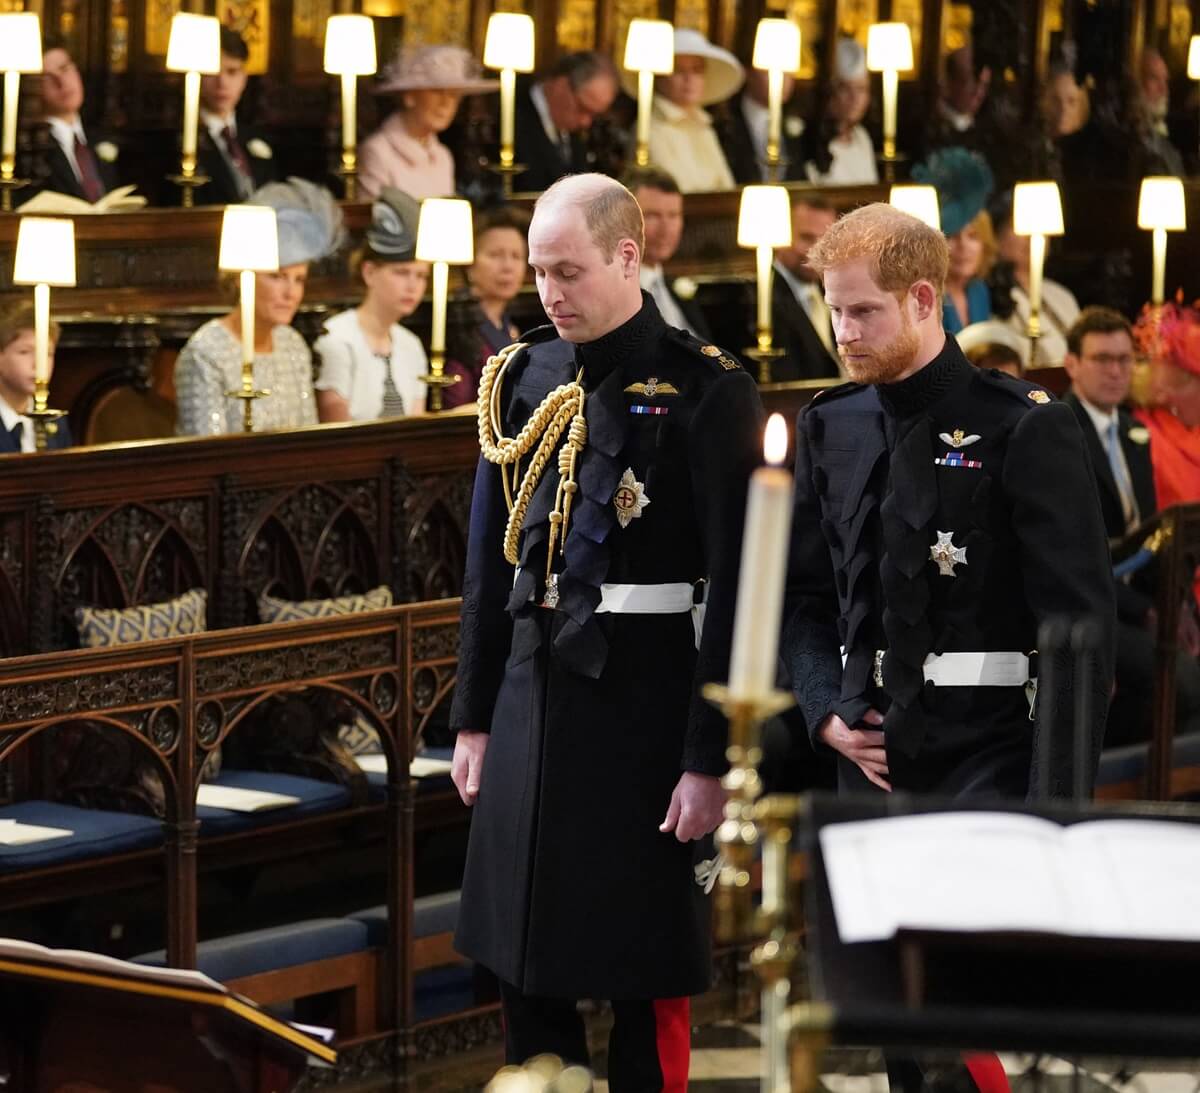 Prince Harry standing with his best man Prince William before his royal wedding to Meghan Markle at St George's Chapel, Windsor Castle